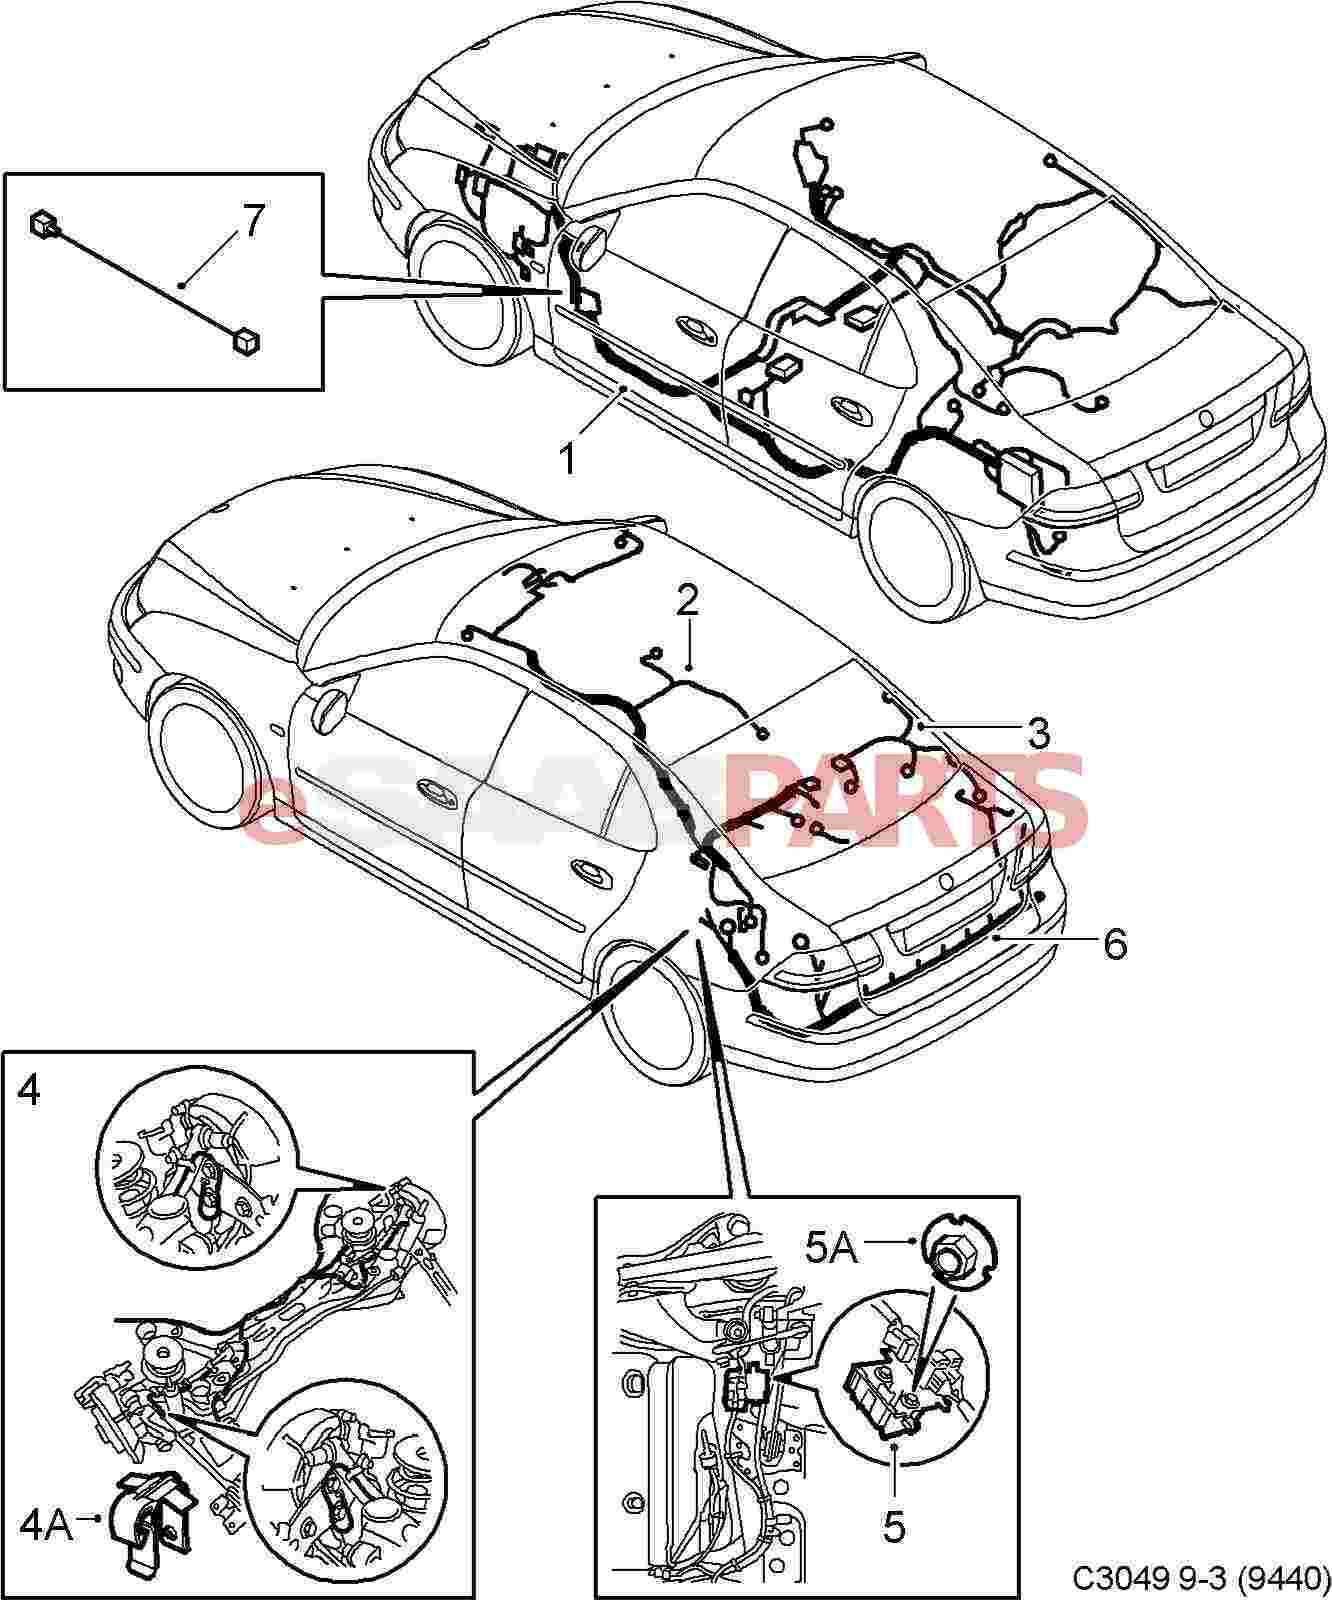 eSaabParts.com - Saab 9-3 (9440) > Electrical Parts > Wiring Harness: Roof   Rear > Compartment - Roof and Rear